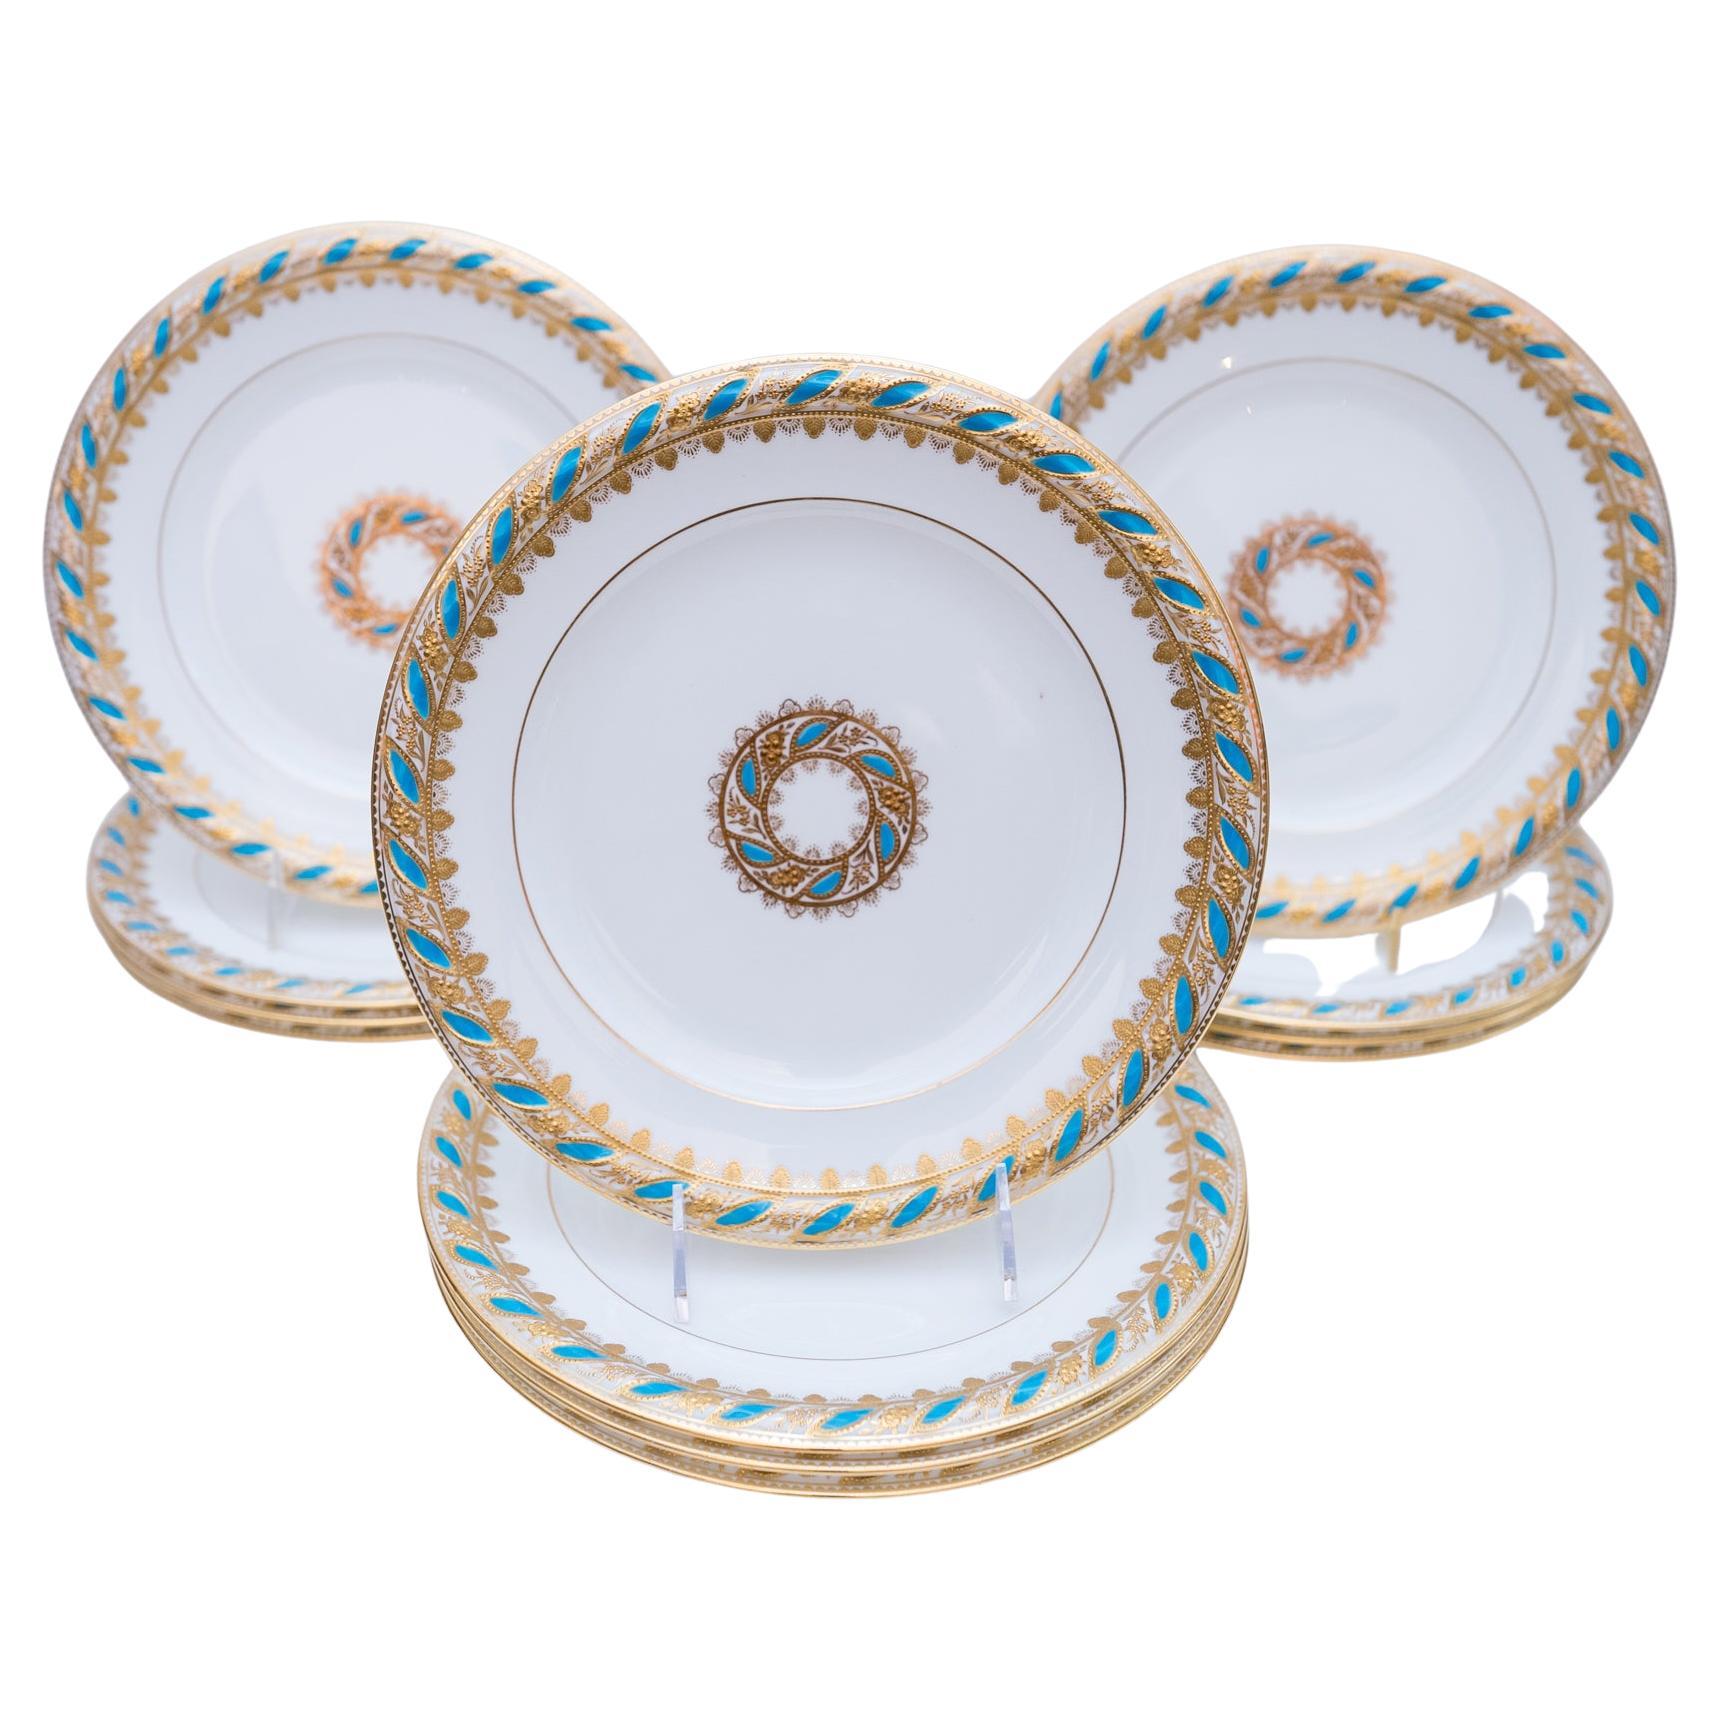 12 Antique Tiffany Turquoise & Gilt Encrusted Dinner Plates, Circa 1890